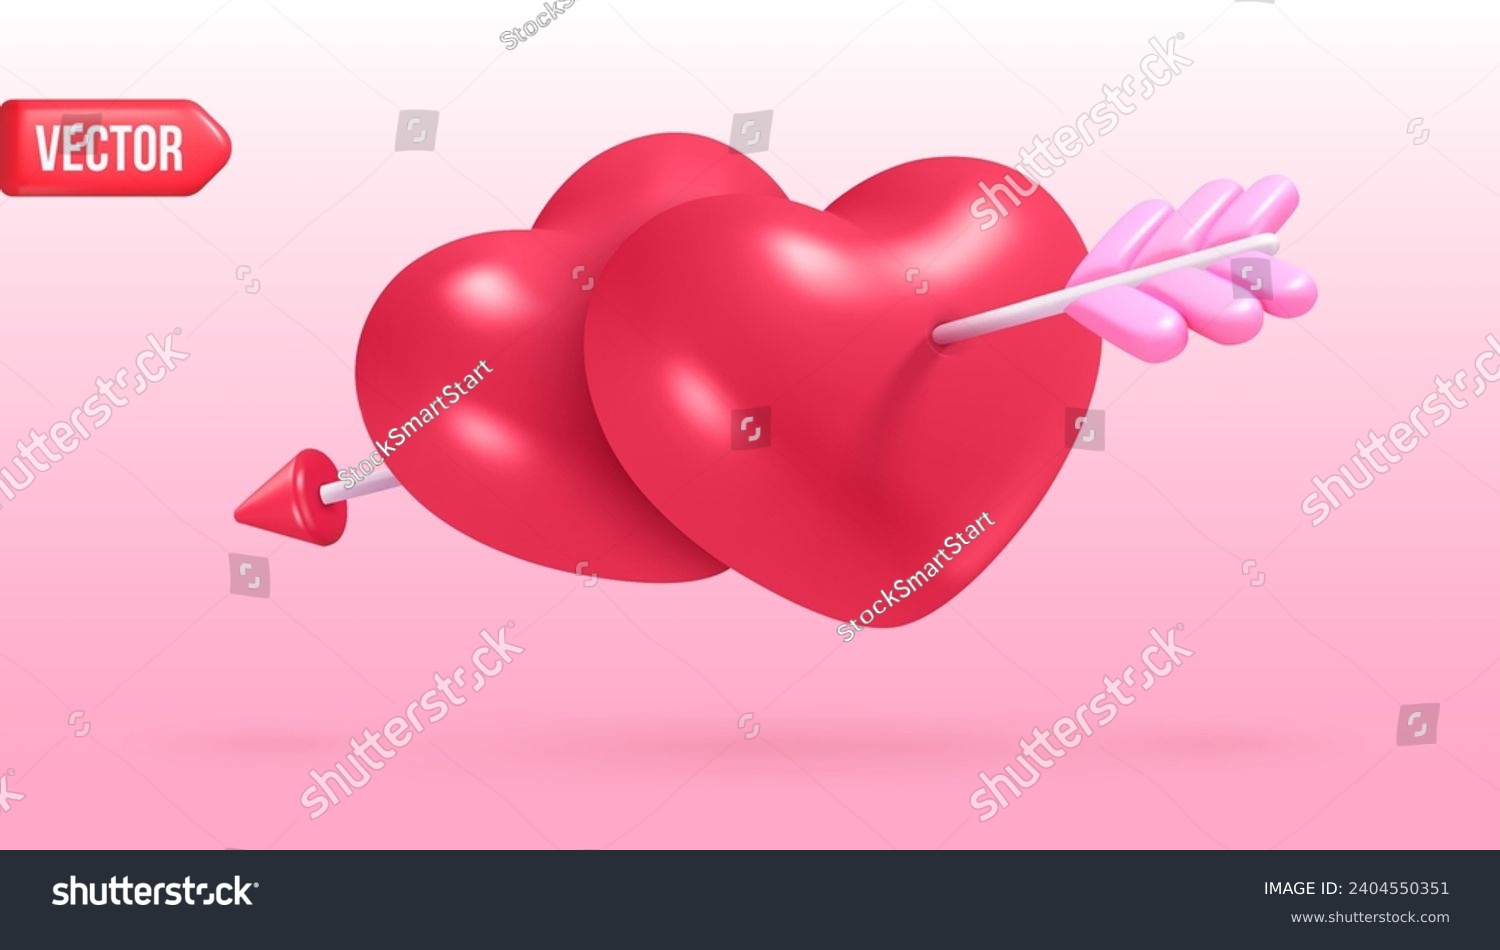 SVG of 3d hearts arrow. Heart piercing cupid arrows, loving couple relationship concept, romantic love symbol joy marriage valentine day advertising, realistic nowaday vector illustration svg